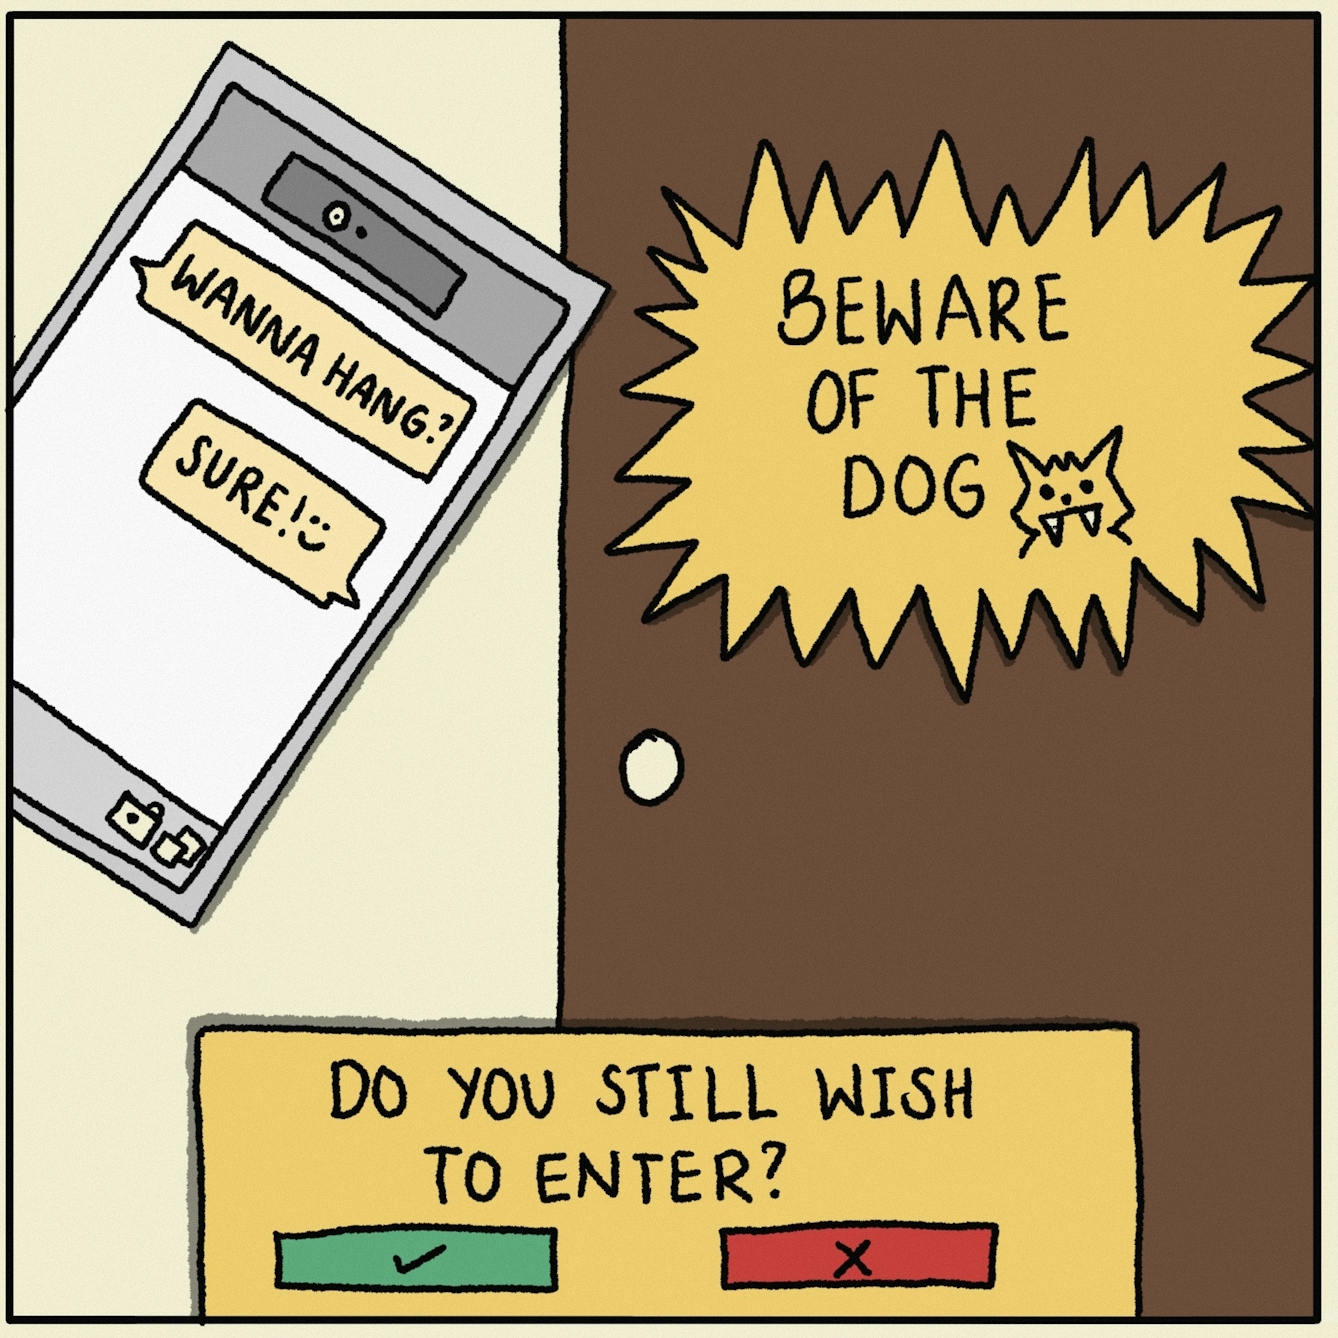 Panel 3 of a digitally drawn, four-panel comic titled ‘Zoning’. Your character is about to hang out with a friend, but on their front door is a sign reading ‘BEWARE OF THE DOG’. You’re asked if you still wish to enter.